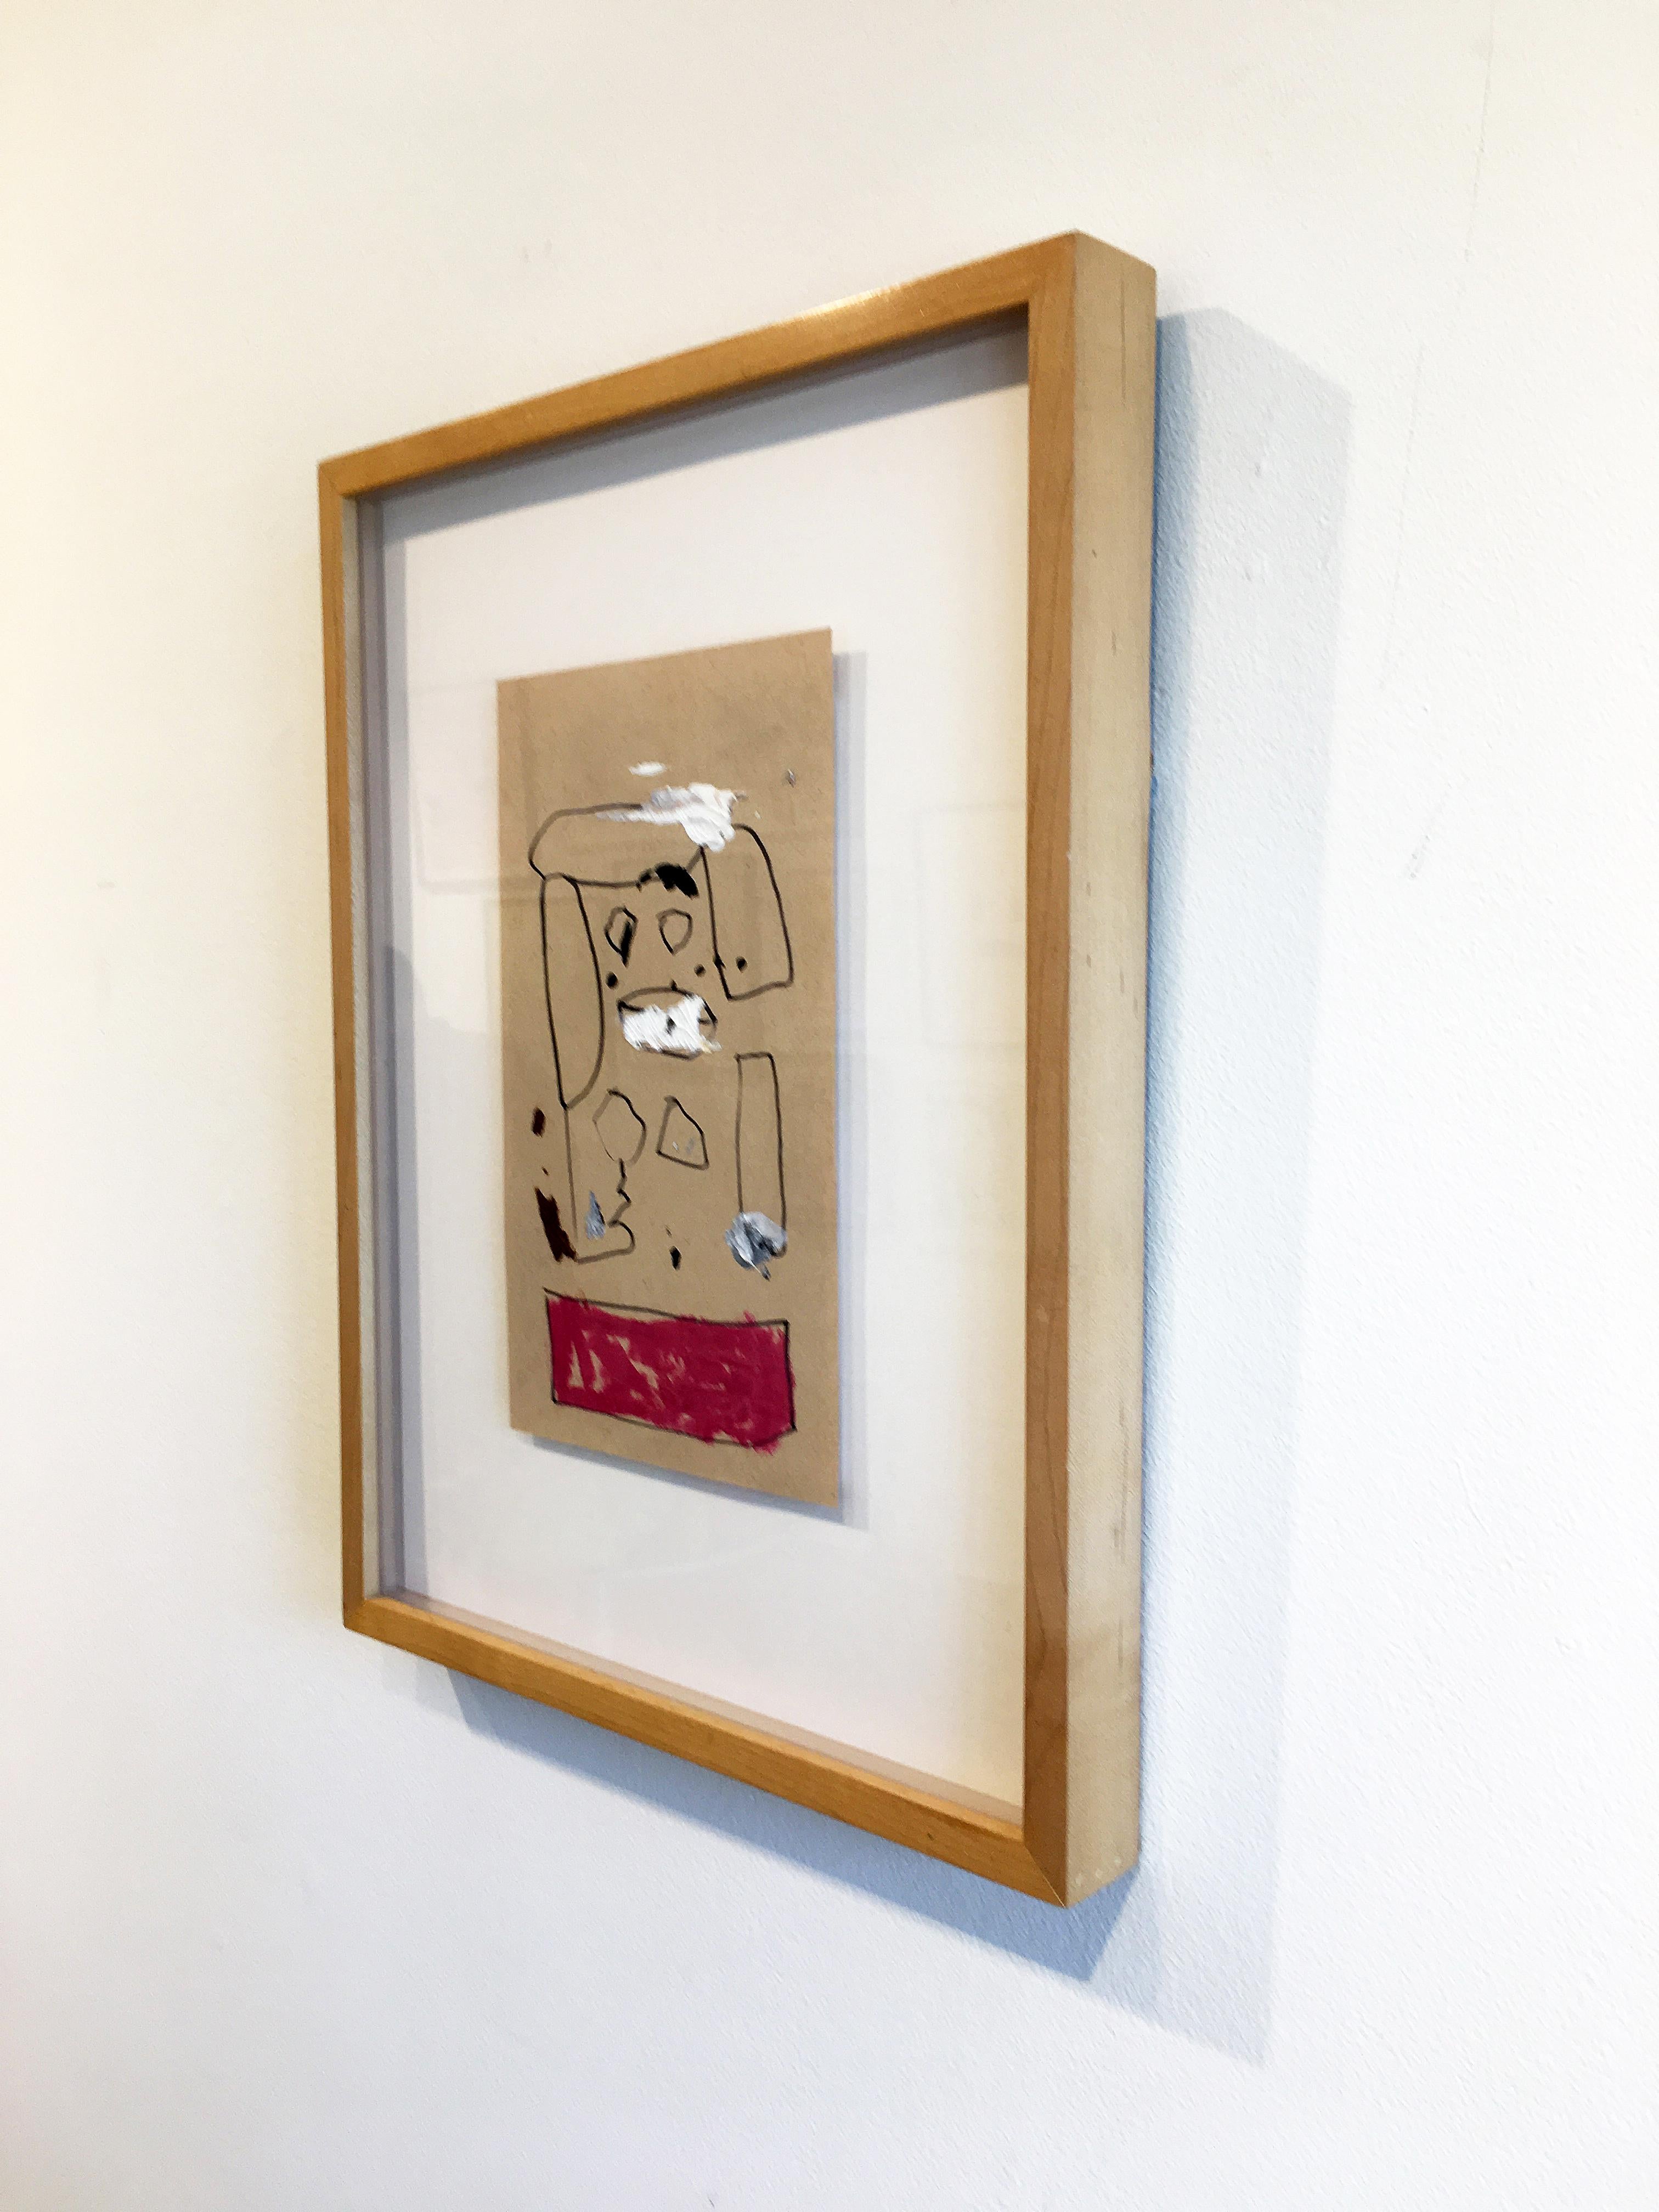 'Magenta Float Girl' by Adam Handler, 2015. Oil stick and pencil on paper, 9.25 x 6.125 in. / Frame: 16.25 x 12.25 in. This work on paper by American artist Adam Handler depicts a girl in his signature naive, child-like style. The black outlined